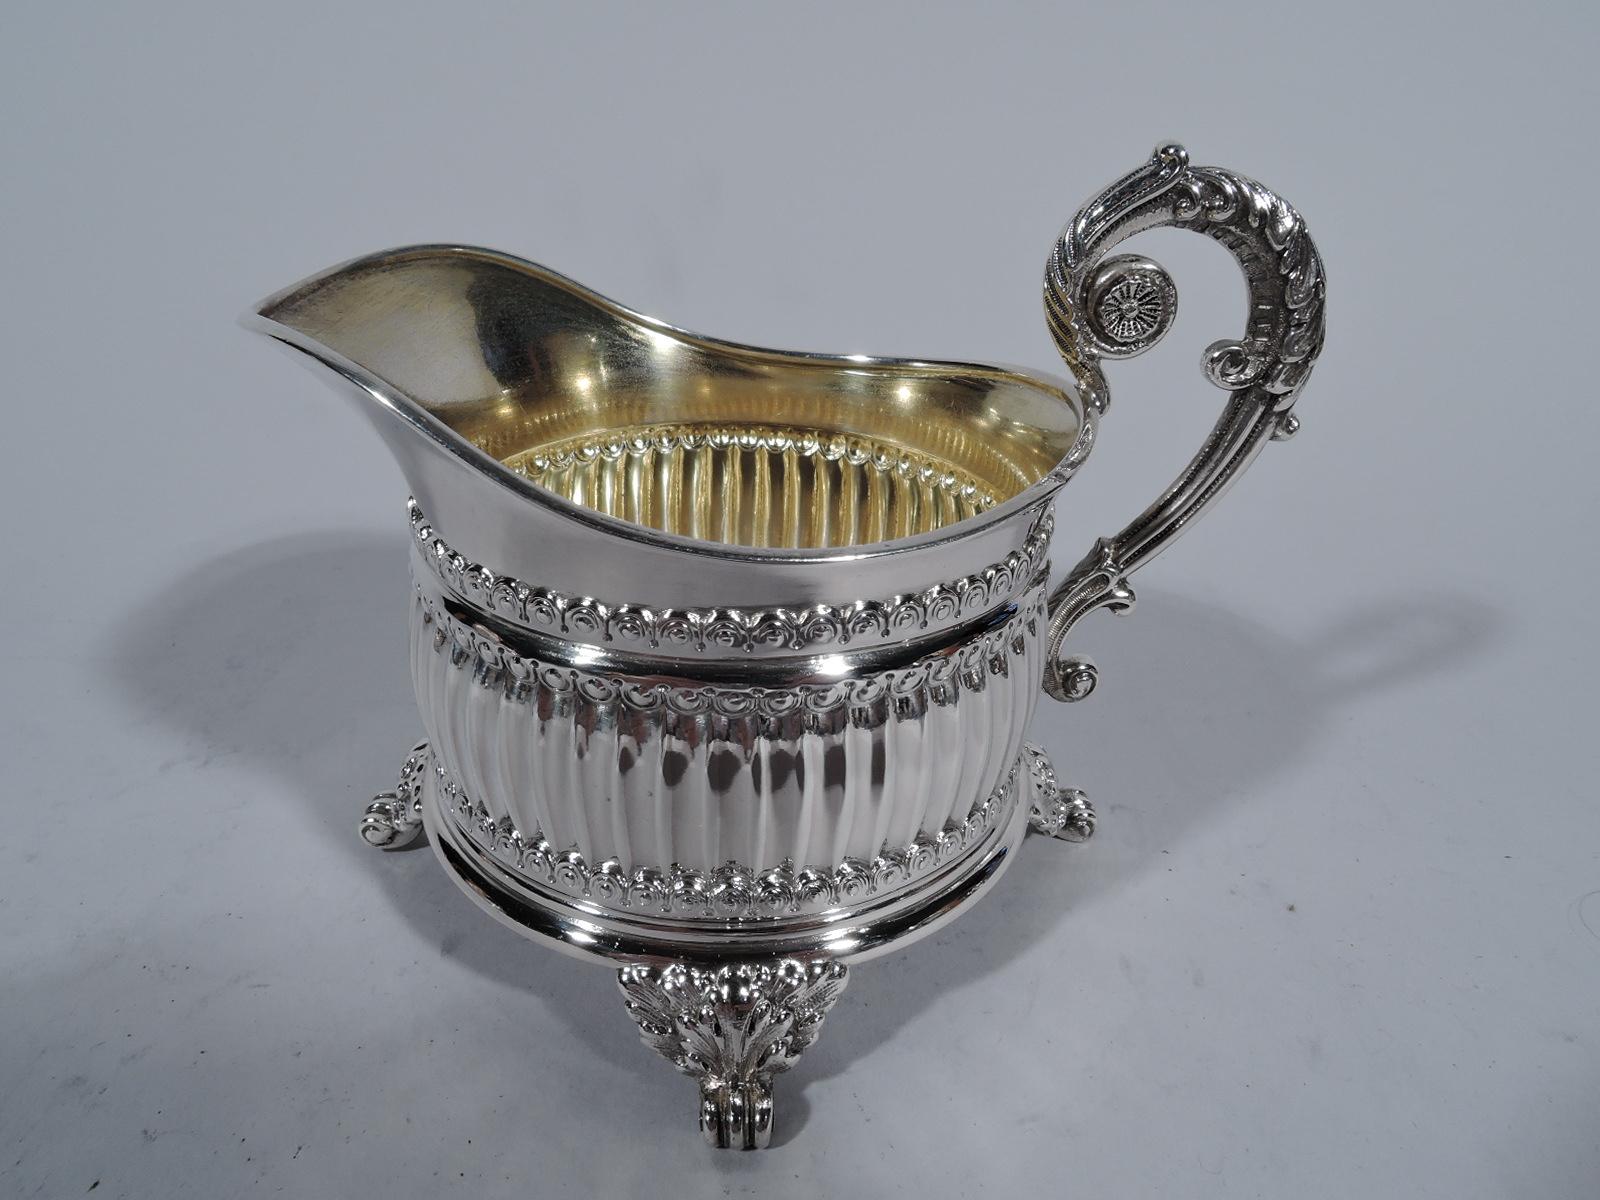 Pair of neoclassical sterling silver creamer and sugar. Made by Tiffany & Co. in New York.

Each: Curved and fluted sides, leaf-mounted volute scroll supports, leaf-capped scroll handles, and gilt interior. Stylish Victorian revival. Hallmark